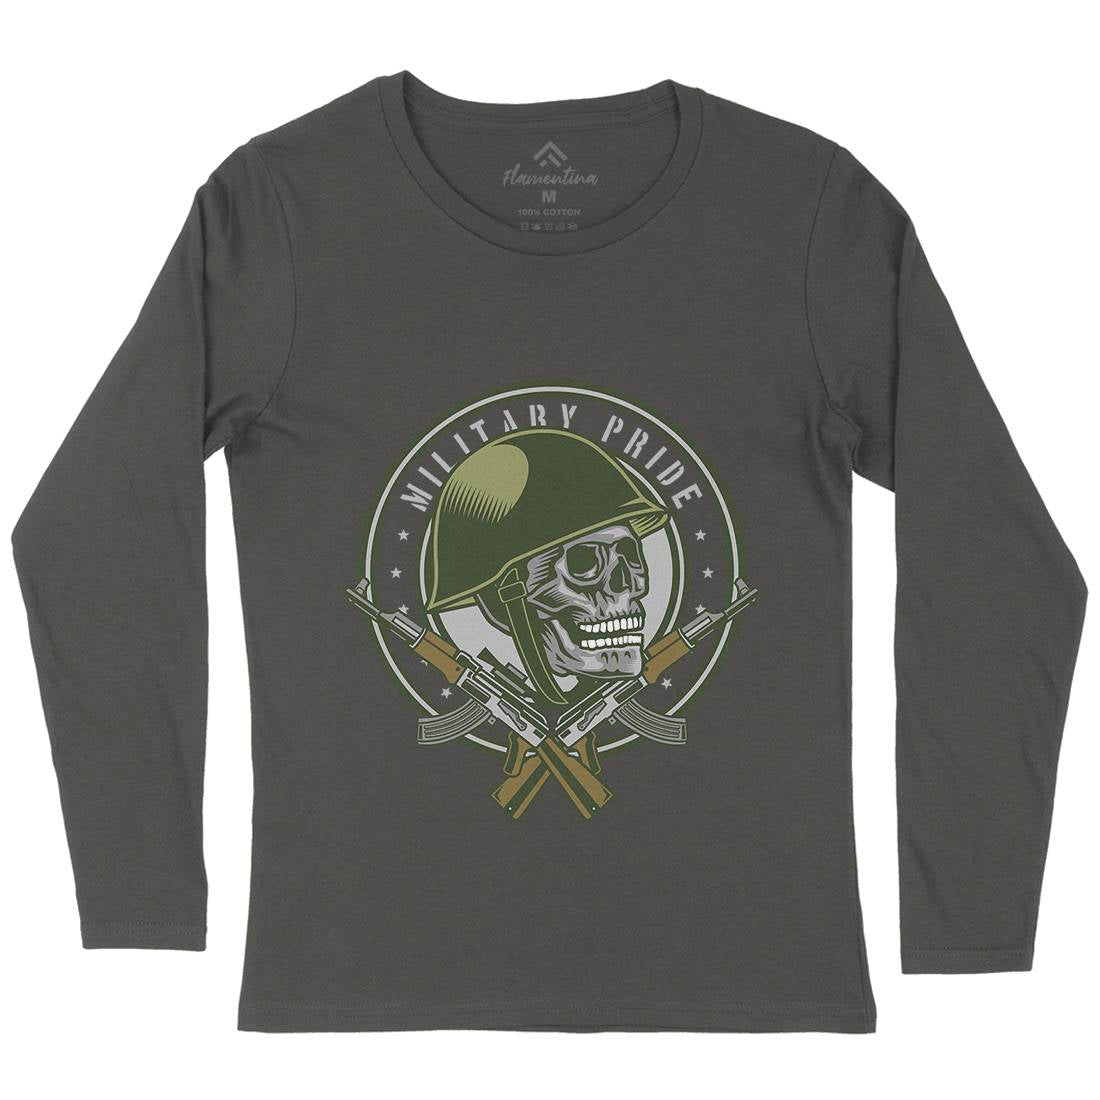 Skull Soldier Womens Long Sleeve T-Shirt Army D578